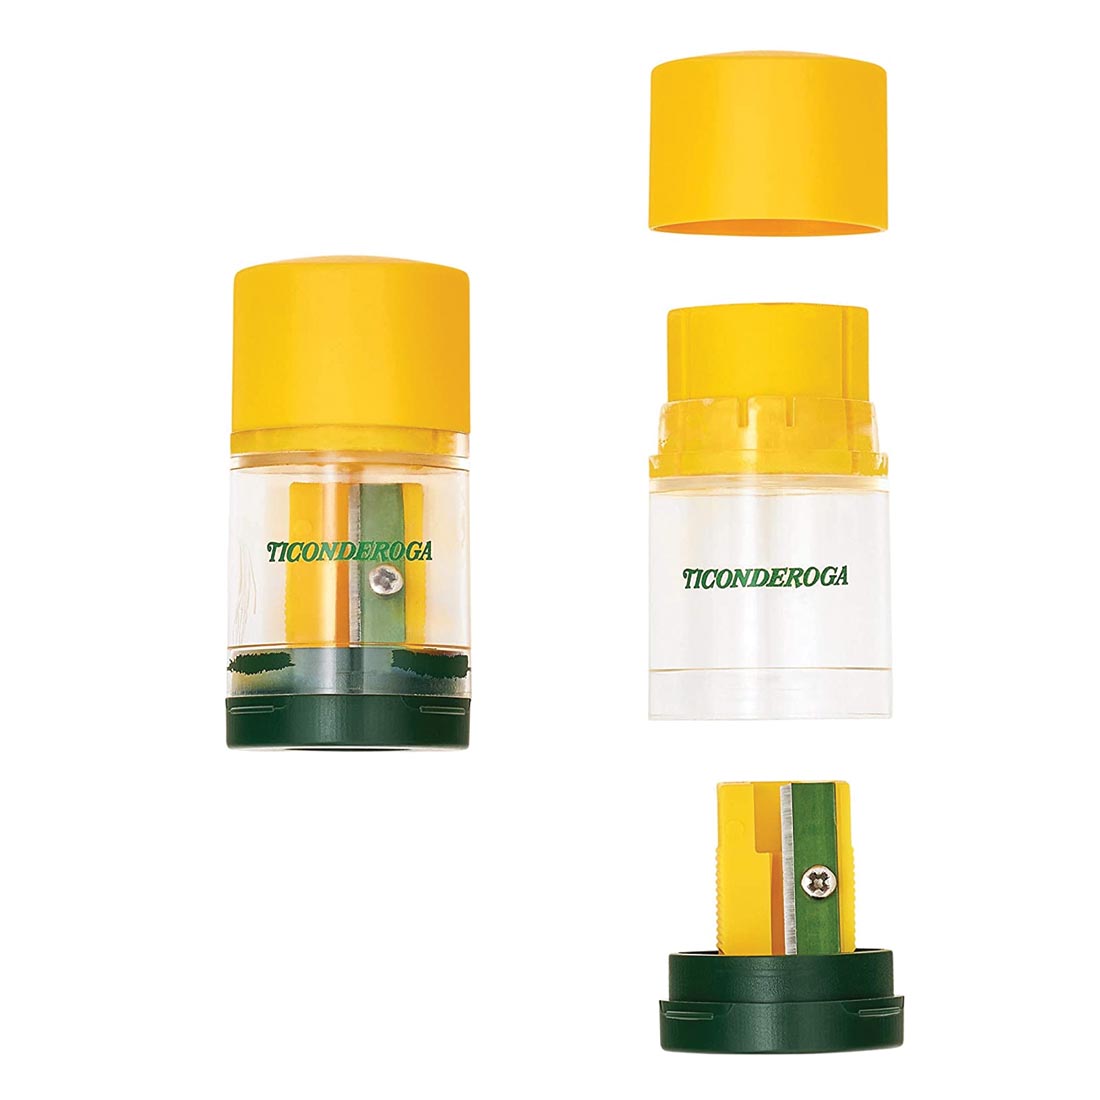 Ticonderoga Duo 2-In-1 Sharpener & Eraser Shown Both With Cap and Lid On, and With Parts Separated